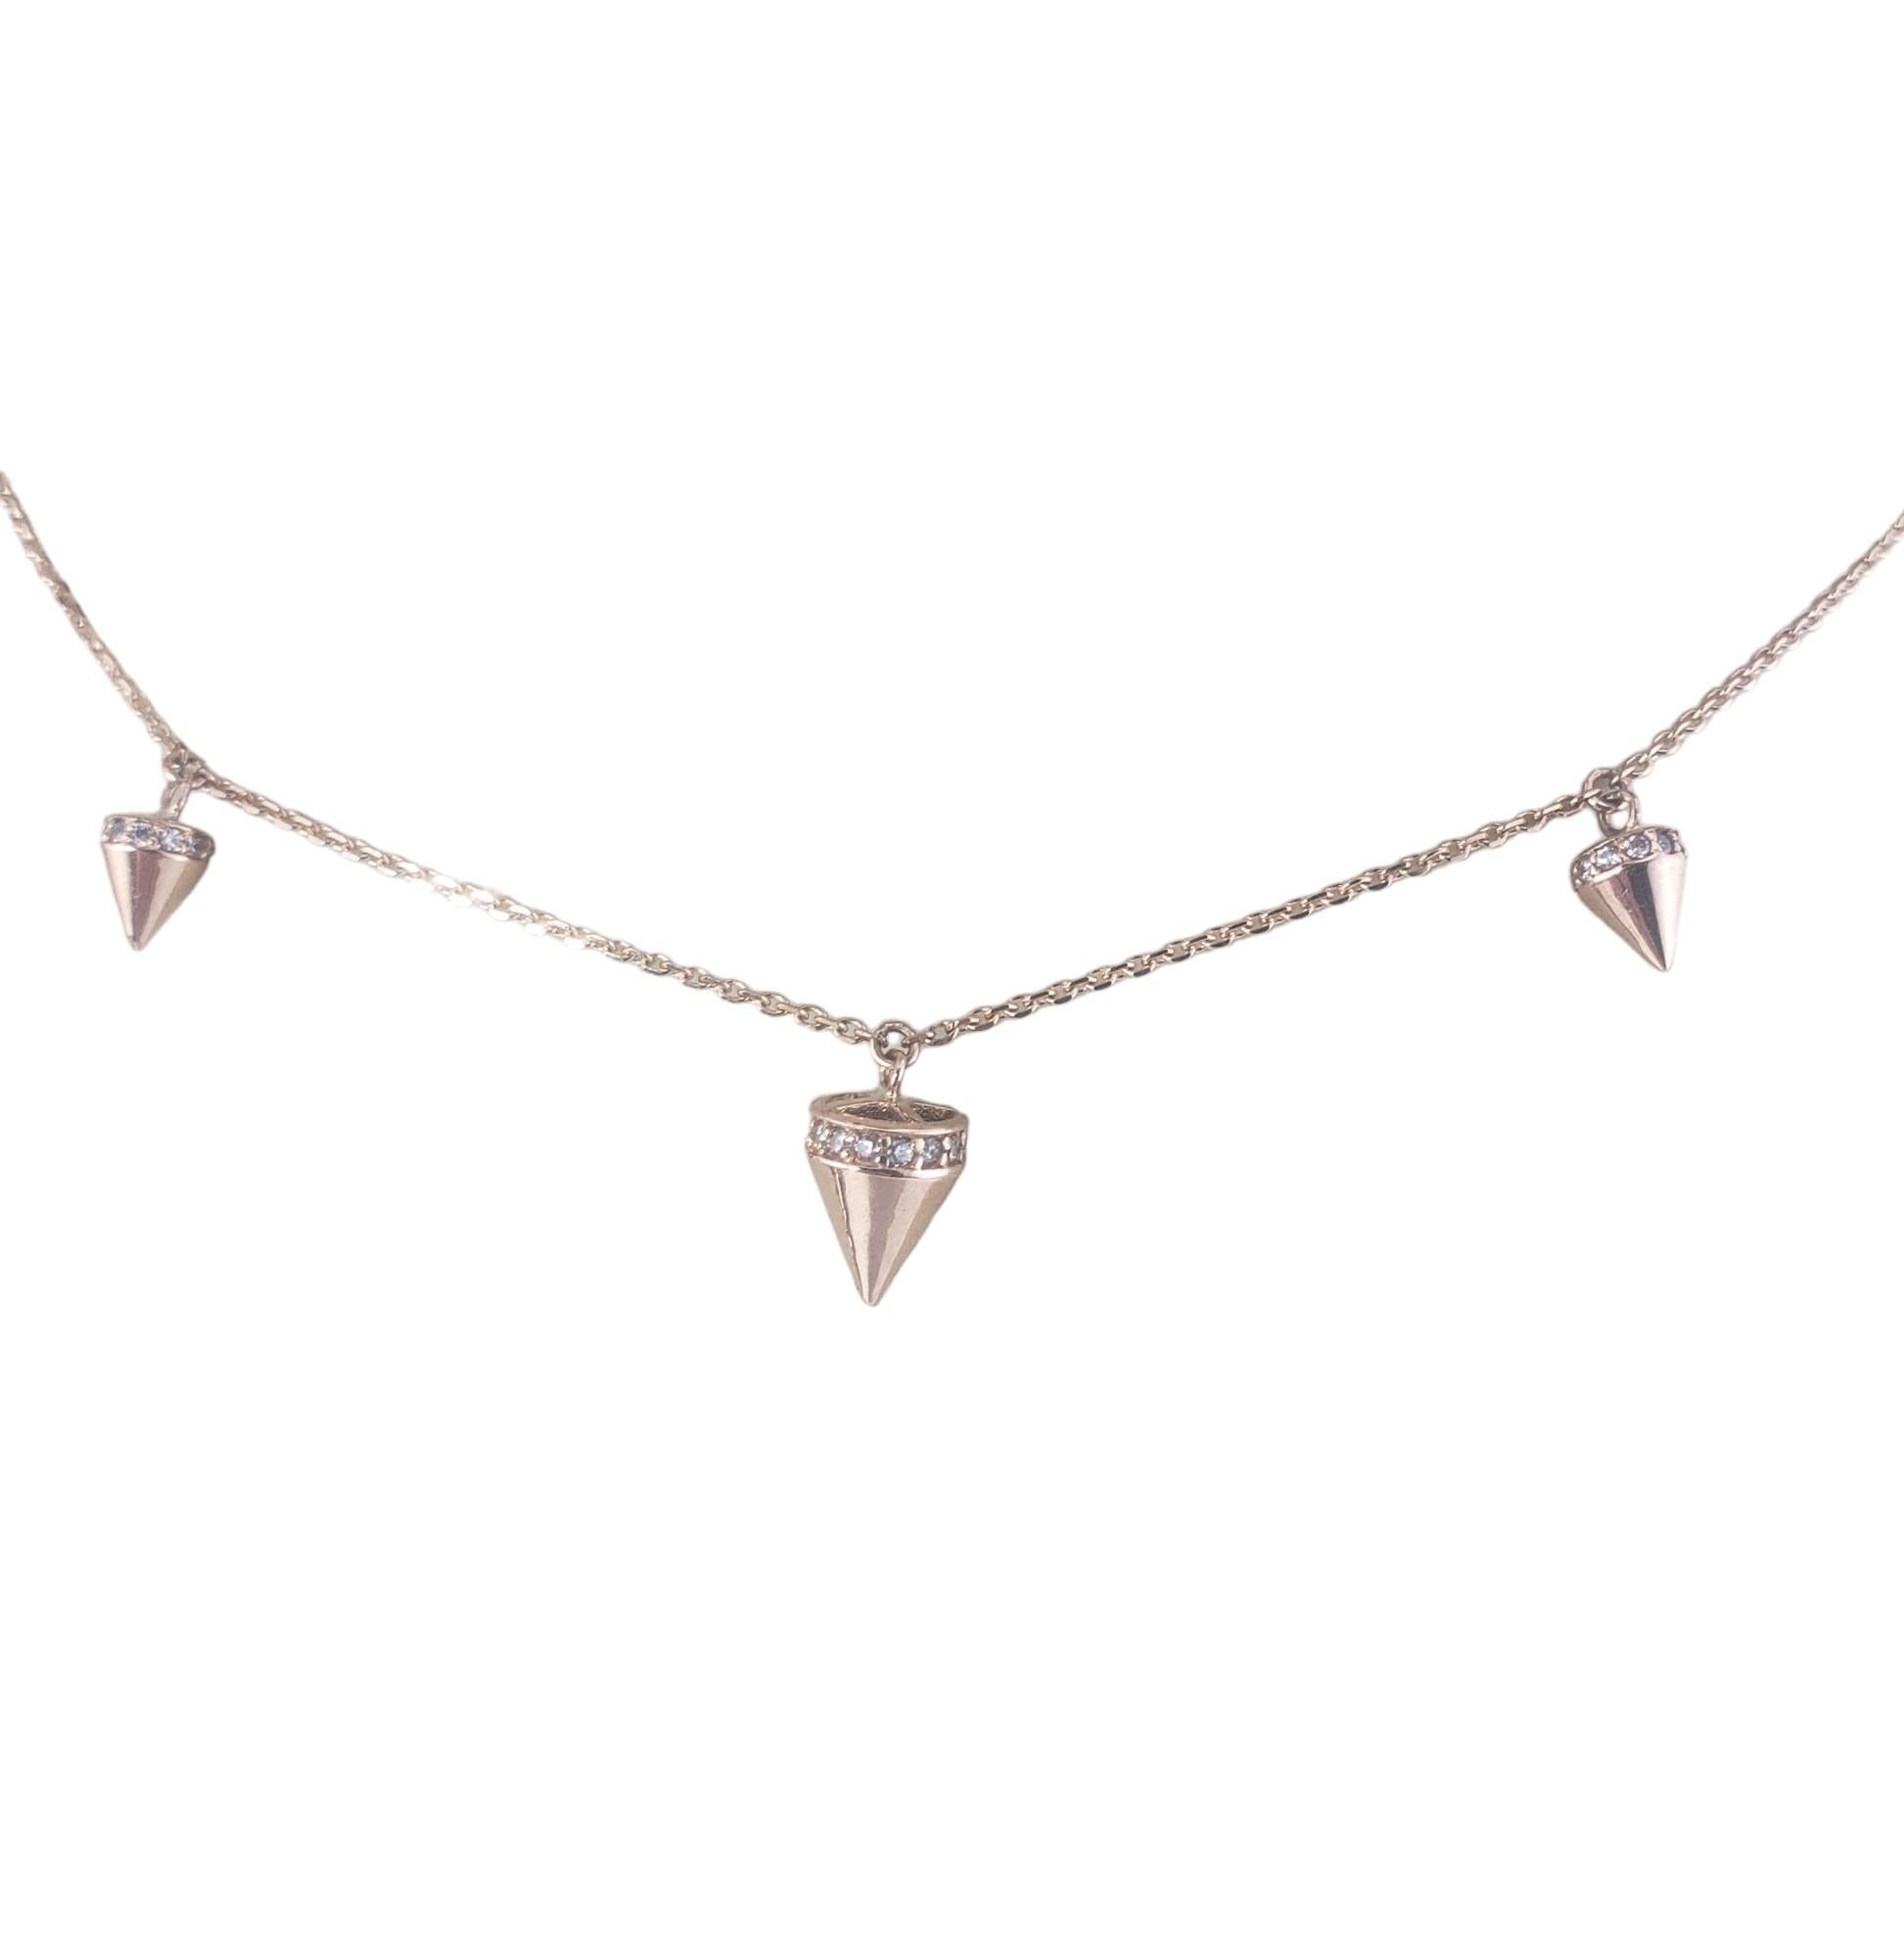 Rafinity 18 Karat Rose Gold Station Necklace-

This lovely station necklace is accented with cubic zirconia stones set in beautifully detailed 18K rose gold.

Size: 15.5 inches

Hallmark: RAFINITY  750

Weight: 3.7 dwt./ 5.9 gr.

Very good